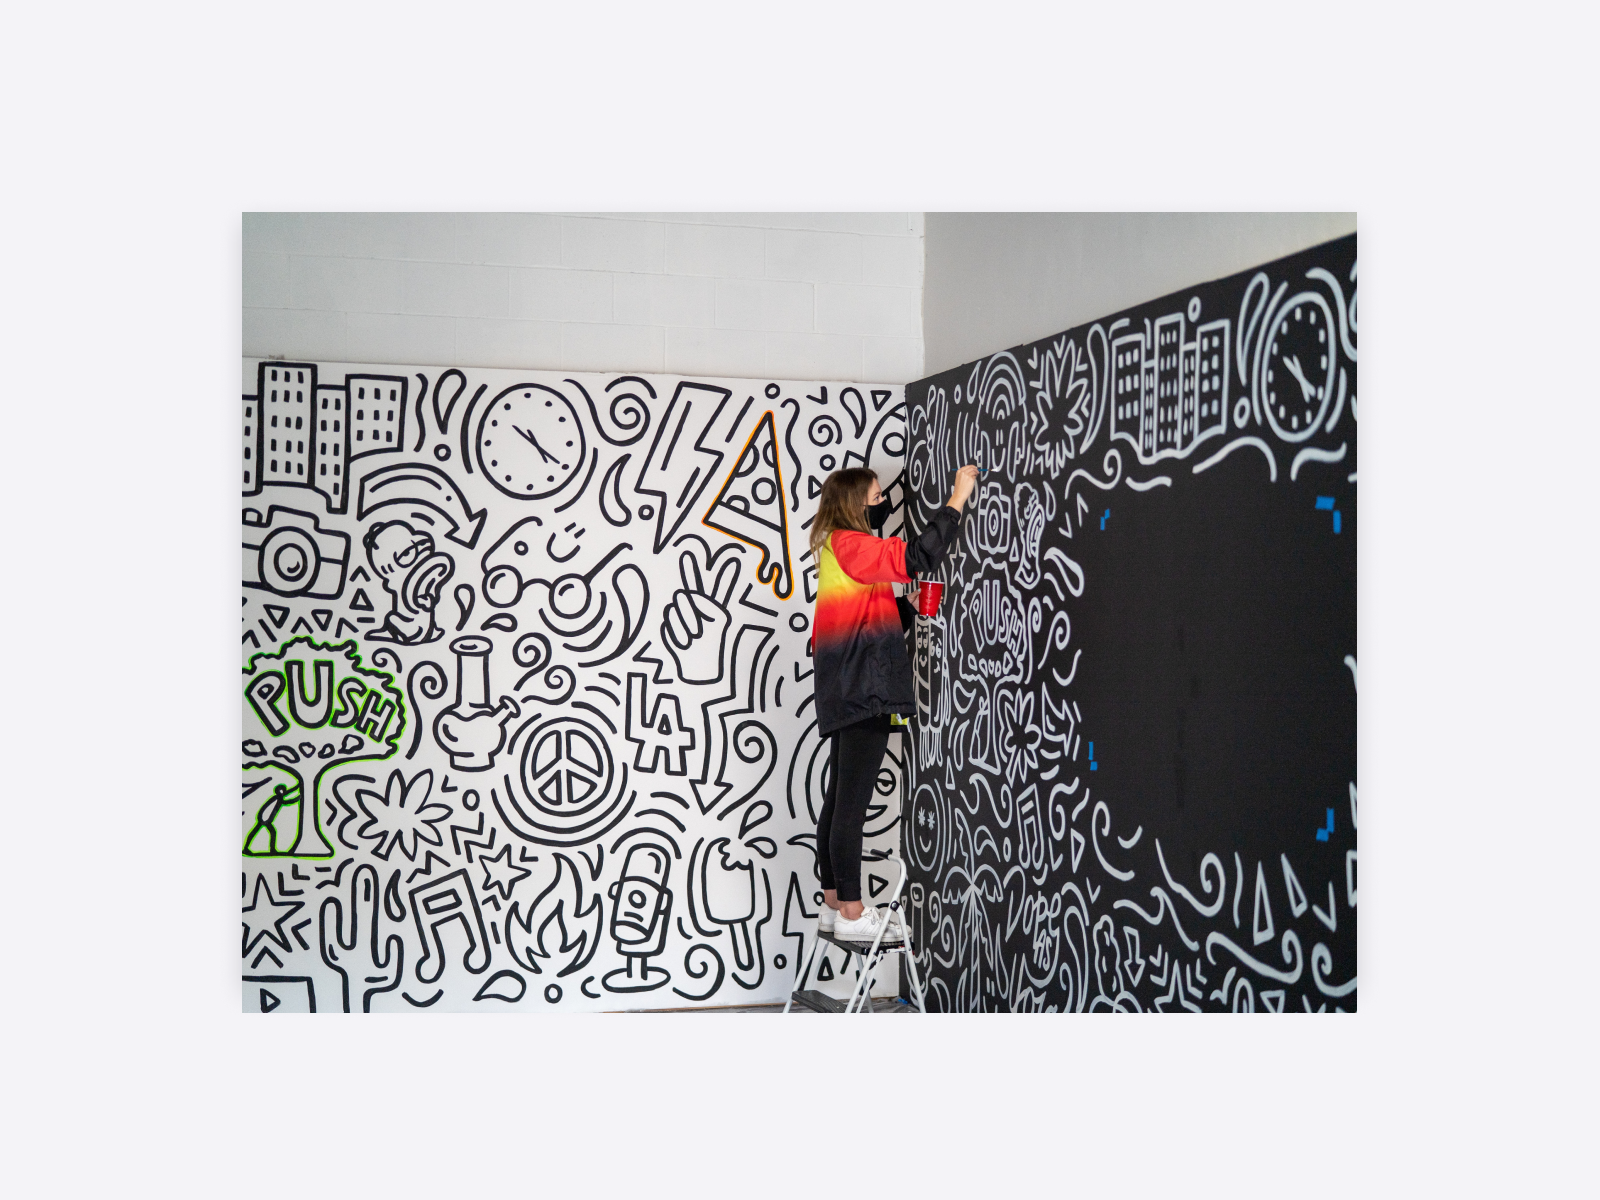 A person creating a black and white doodle mural.